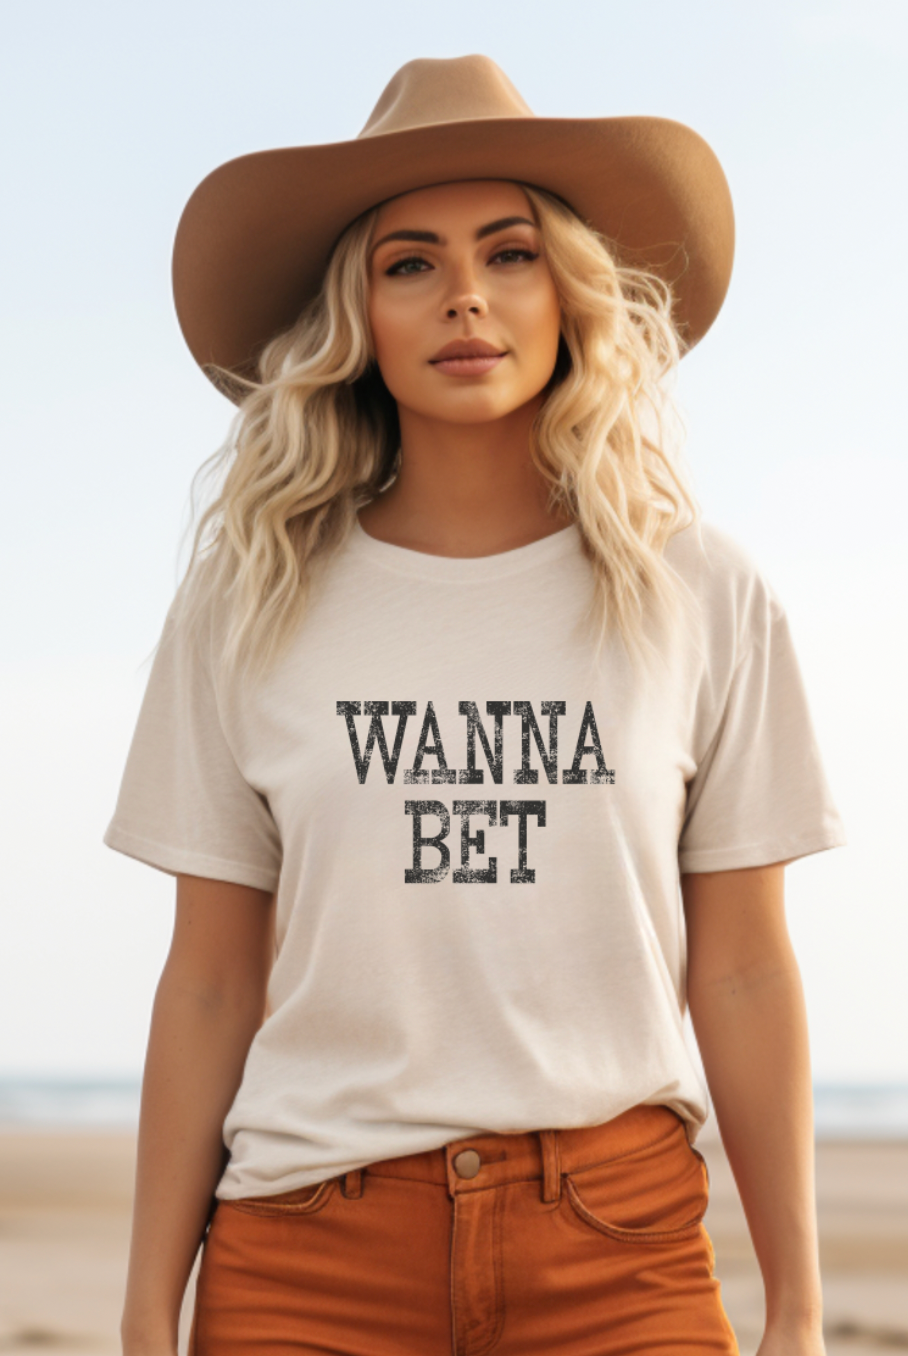 Wanna Bet, a sassy and fun country girl vintage tee on cream shirt.